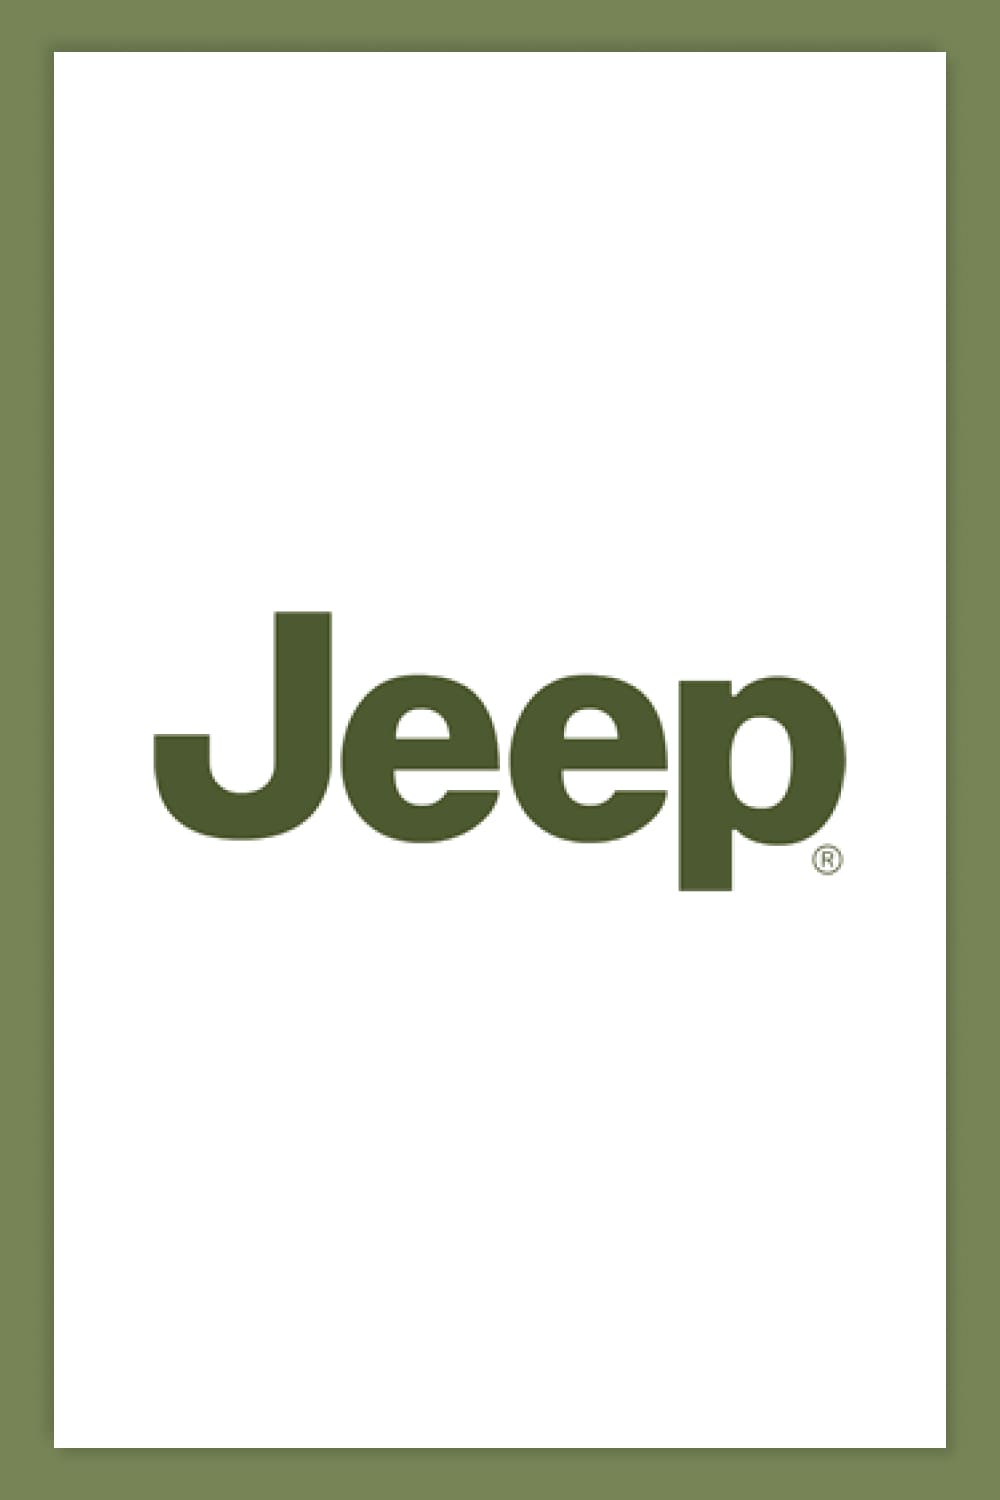 Jeep logo word in green on white background.